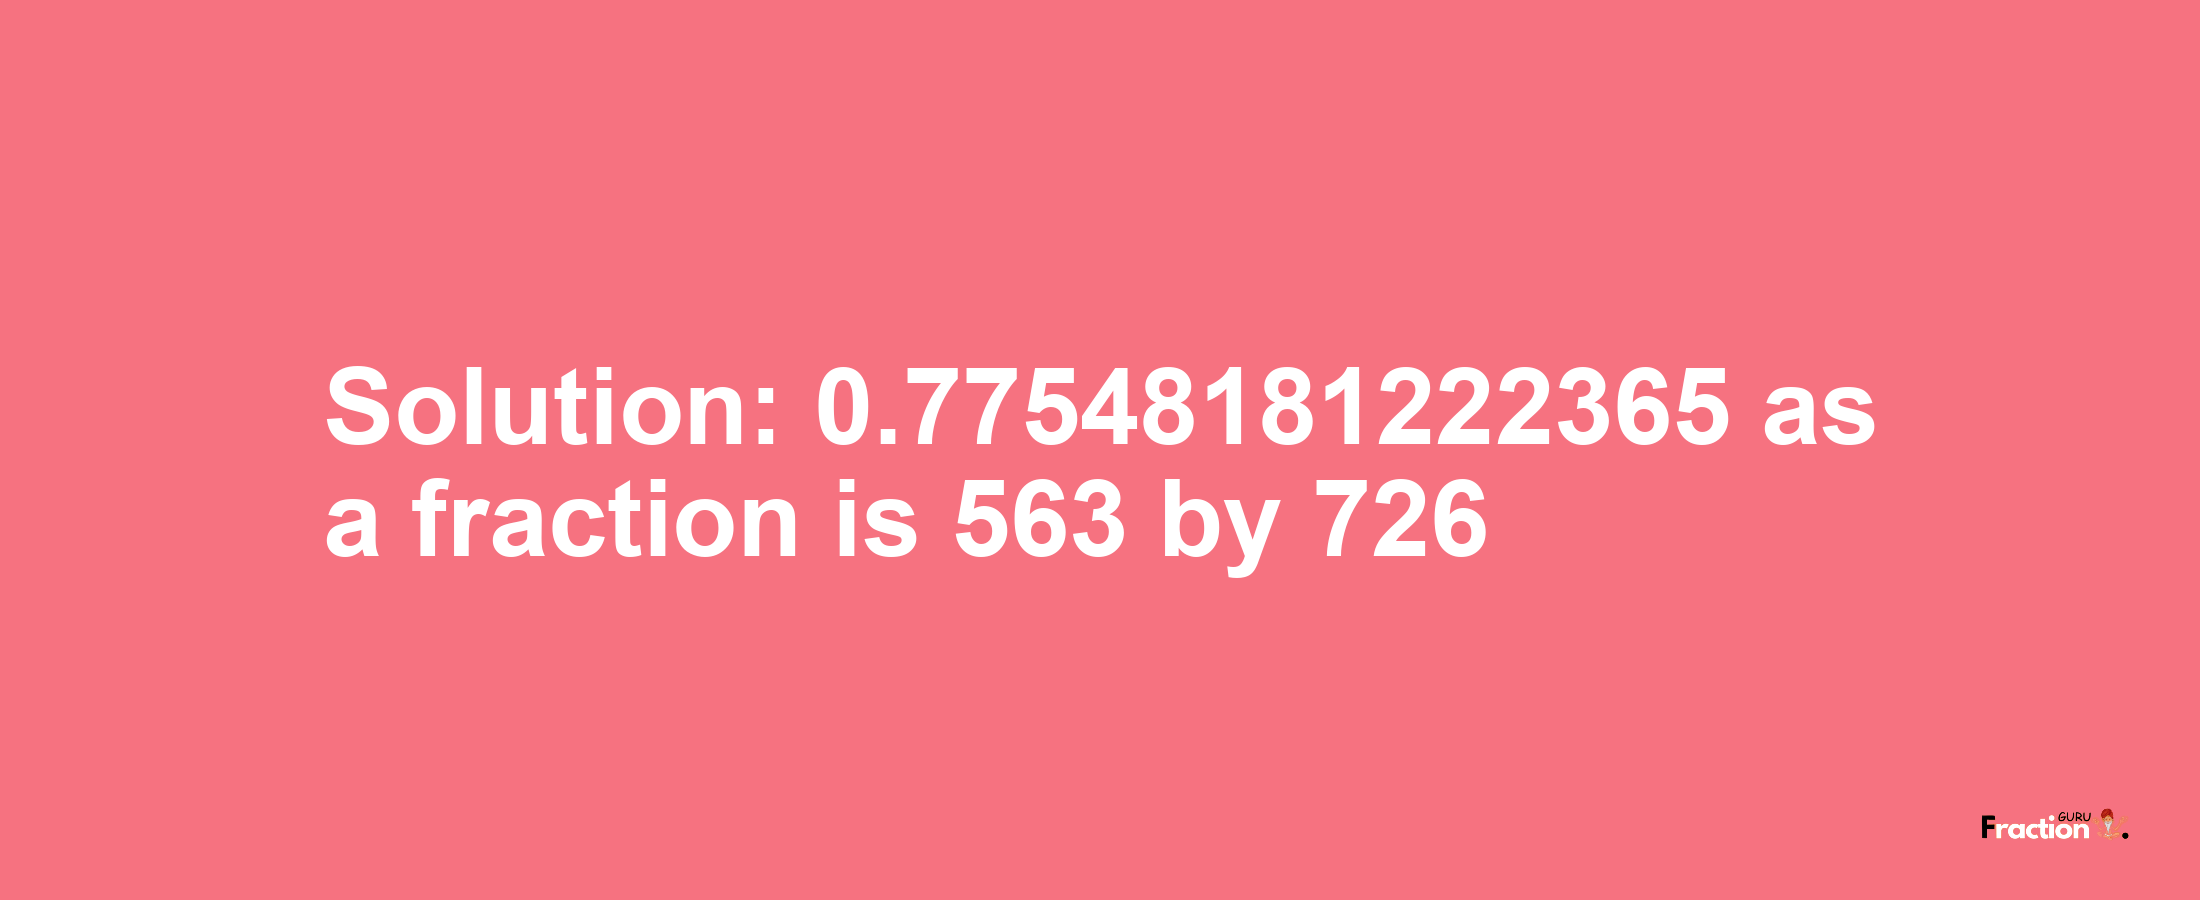 Solution:0.77548181222365 as a fraction is 563/726